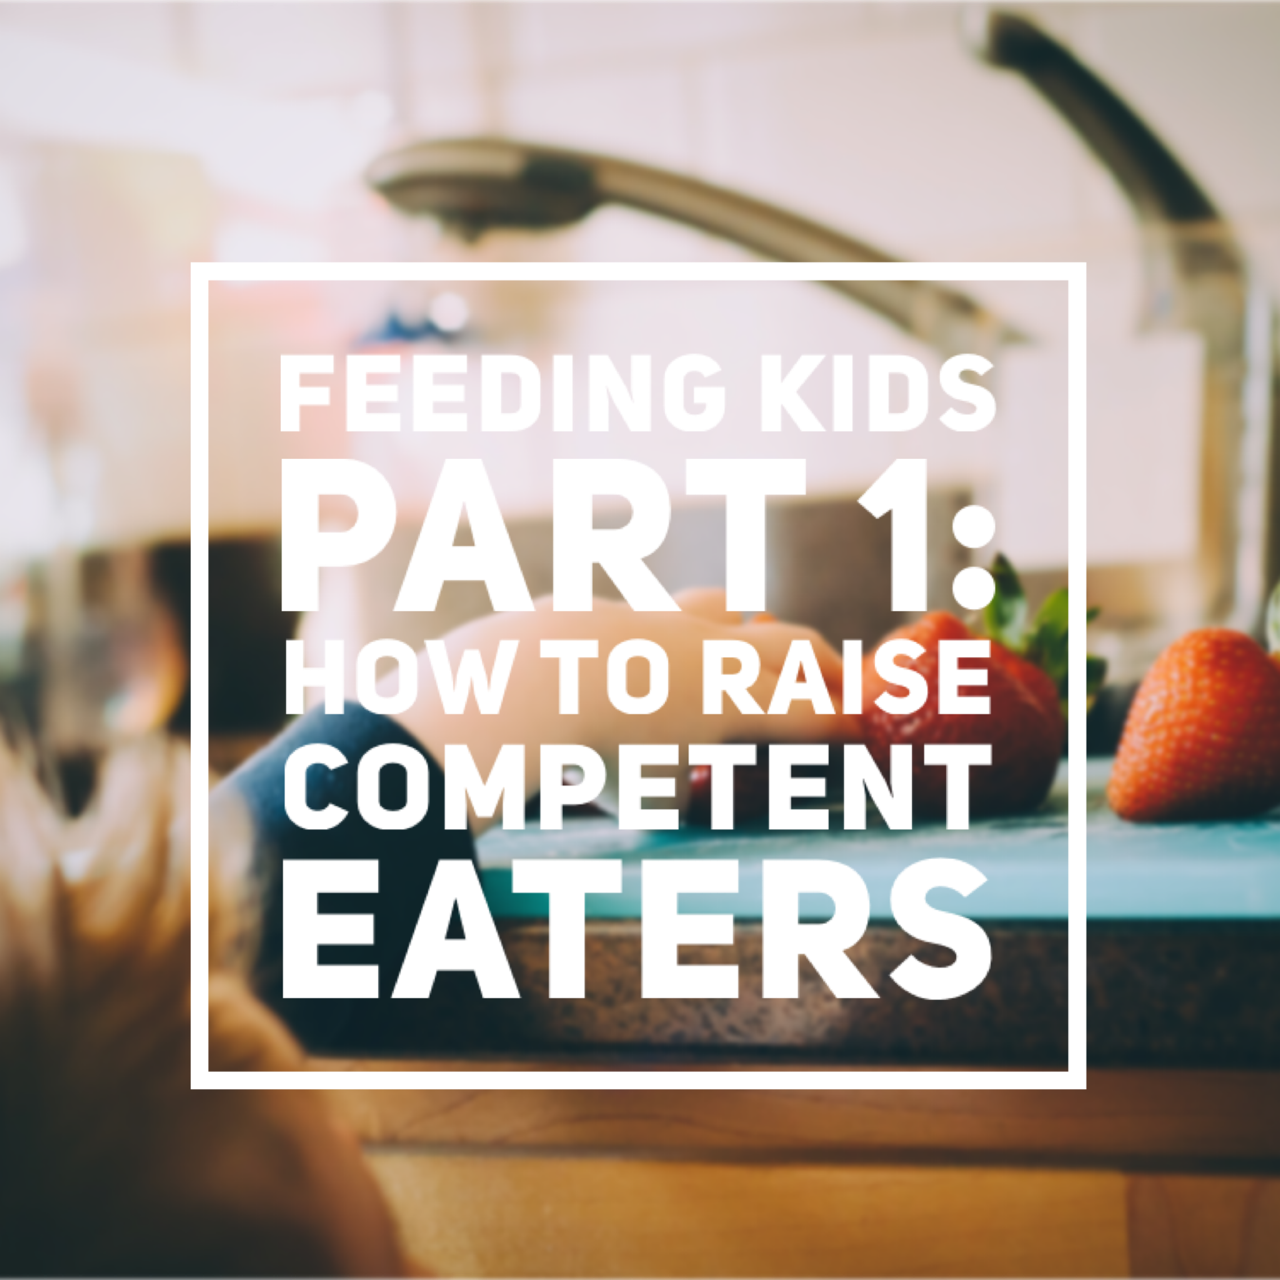 Feeding Kids Part 1: How to Raise Competent Eaters